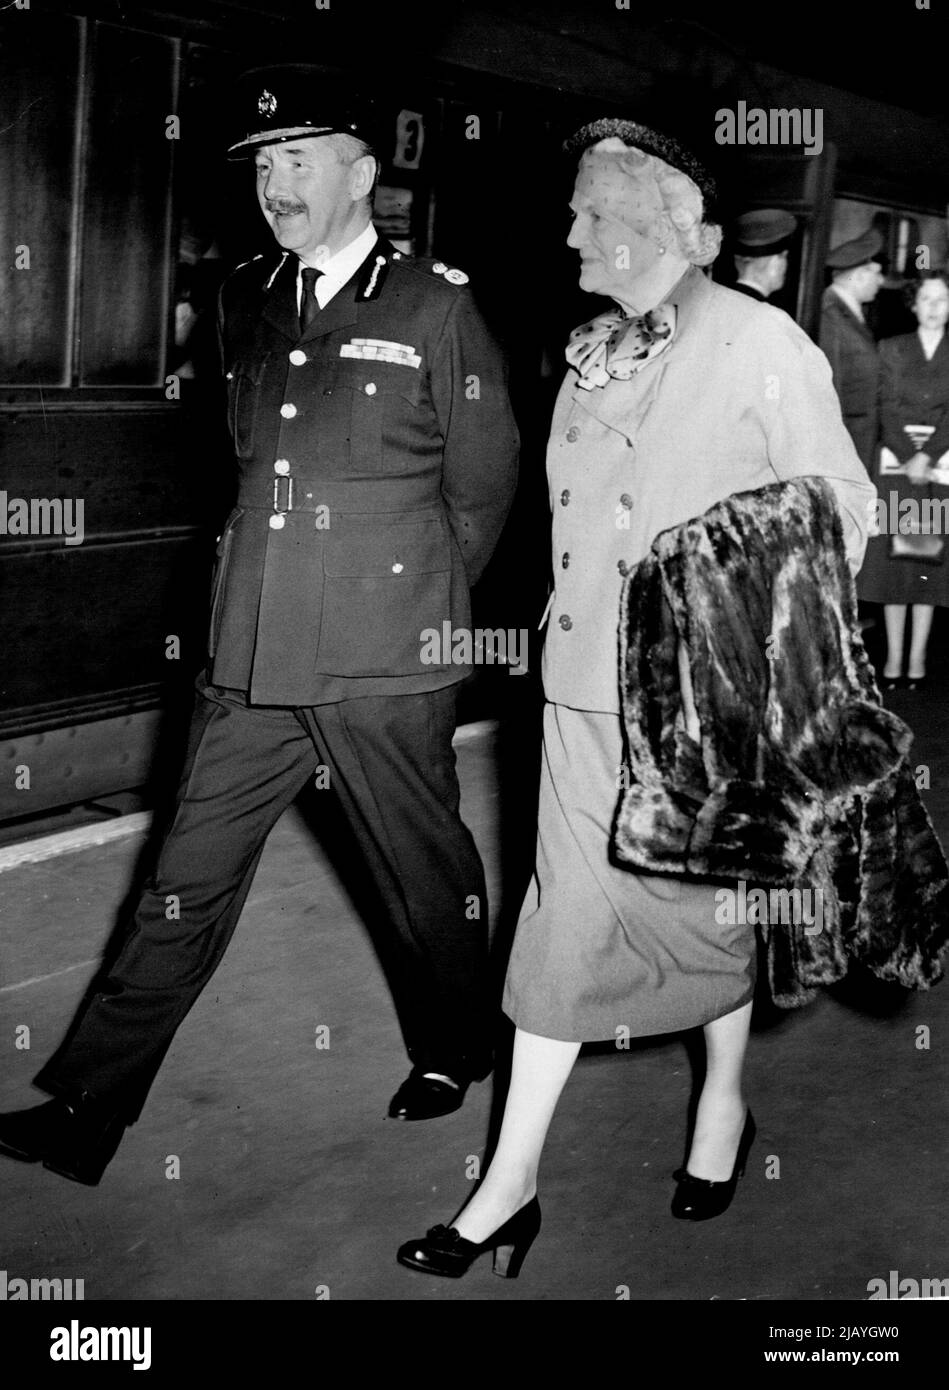 The Churchill's Leave For The North : Lady Churchill is seen walking along the platform at Kings Cross Station, London, prior to her journey to the North. She was accompanied by Sir Winston. The Prime Minister and his wife celebrate their 45th wedding anniversary tomorrow and will attend the St. Ledger. September 11, 1953. (Photo by Daily Express Picture). Stock Photo